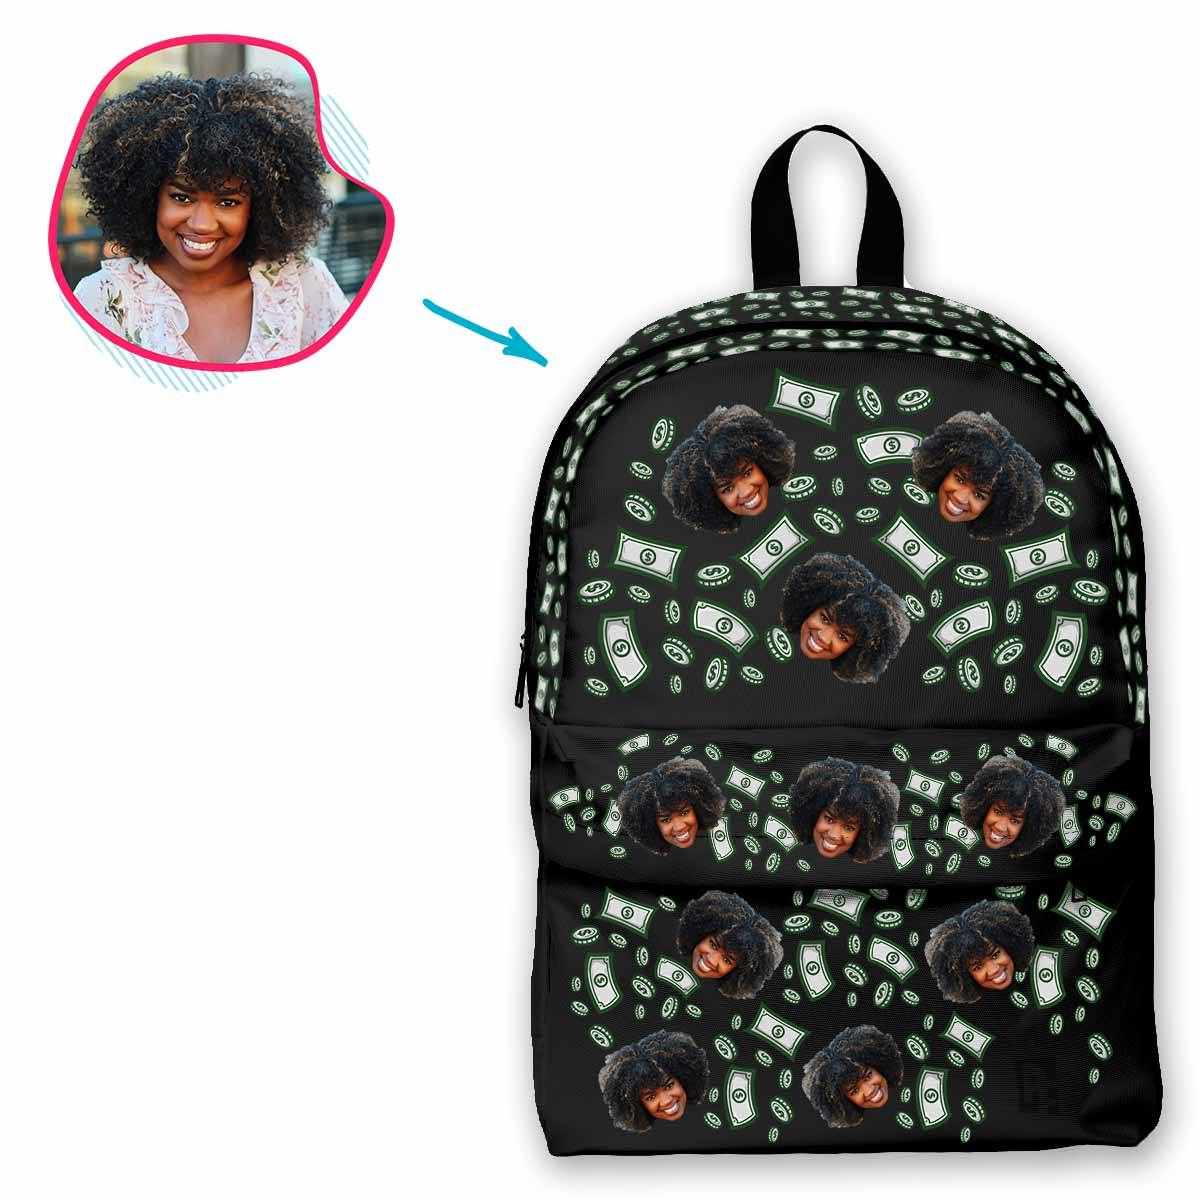 dark Money classic backpack personalized with photo of face printed on it